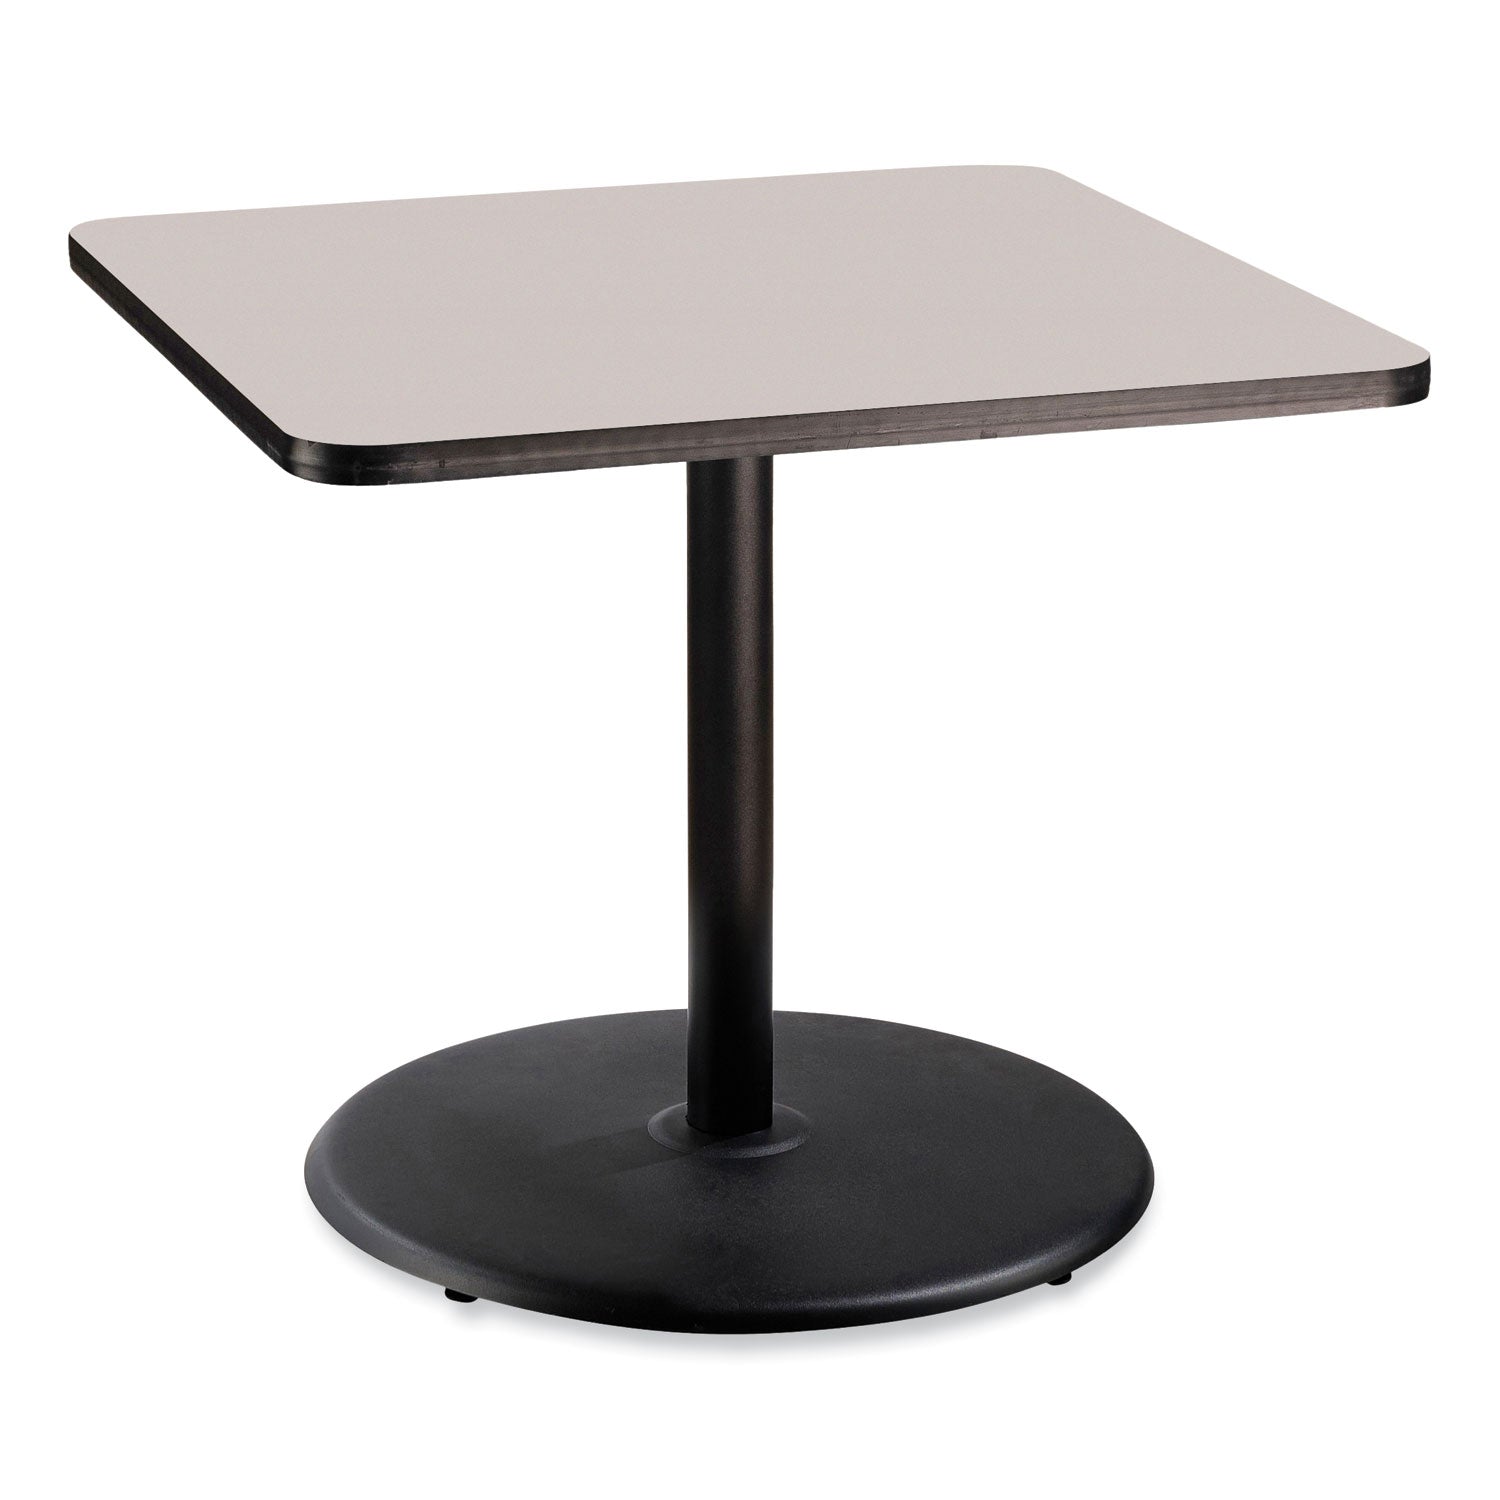 cafe-table-36w-x-36d-x-30h-square-top-round-base-gray-nebula-top-black-base-ships-in-7-10-business-days_npsct33636rd1gy - 1